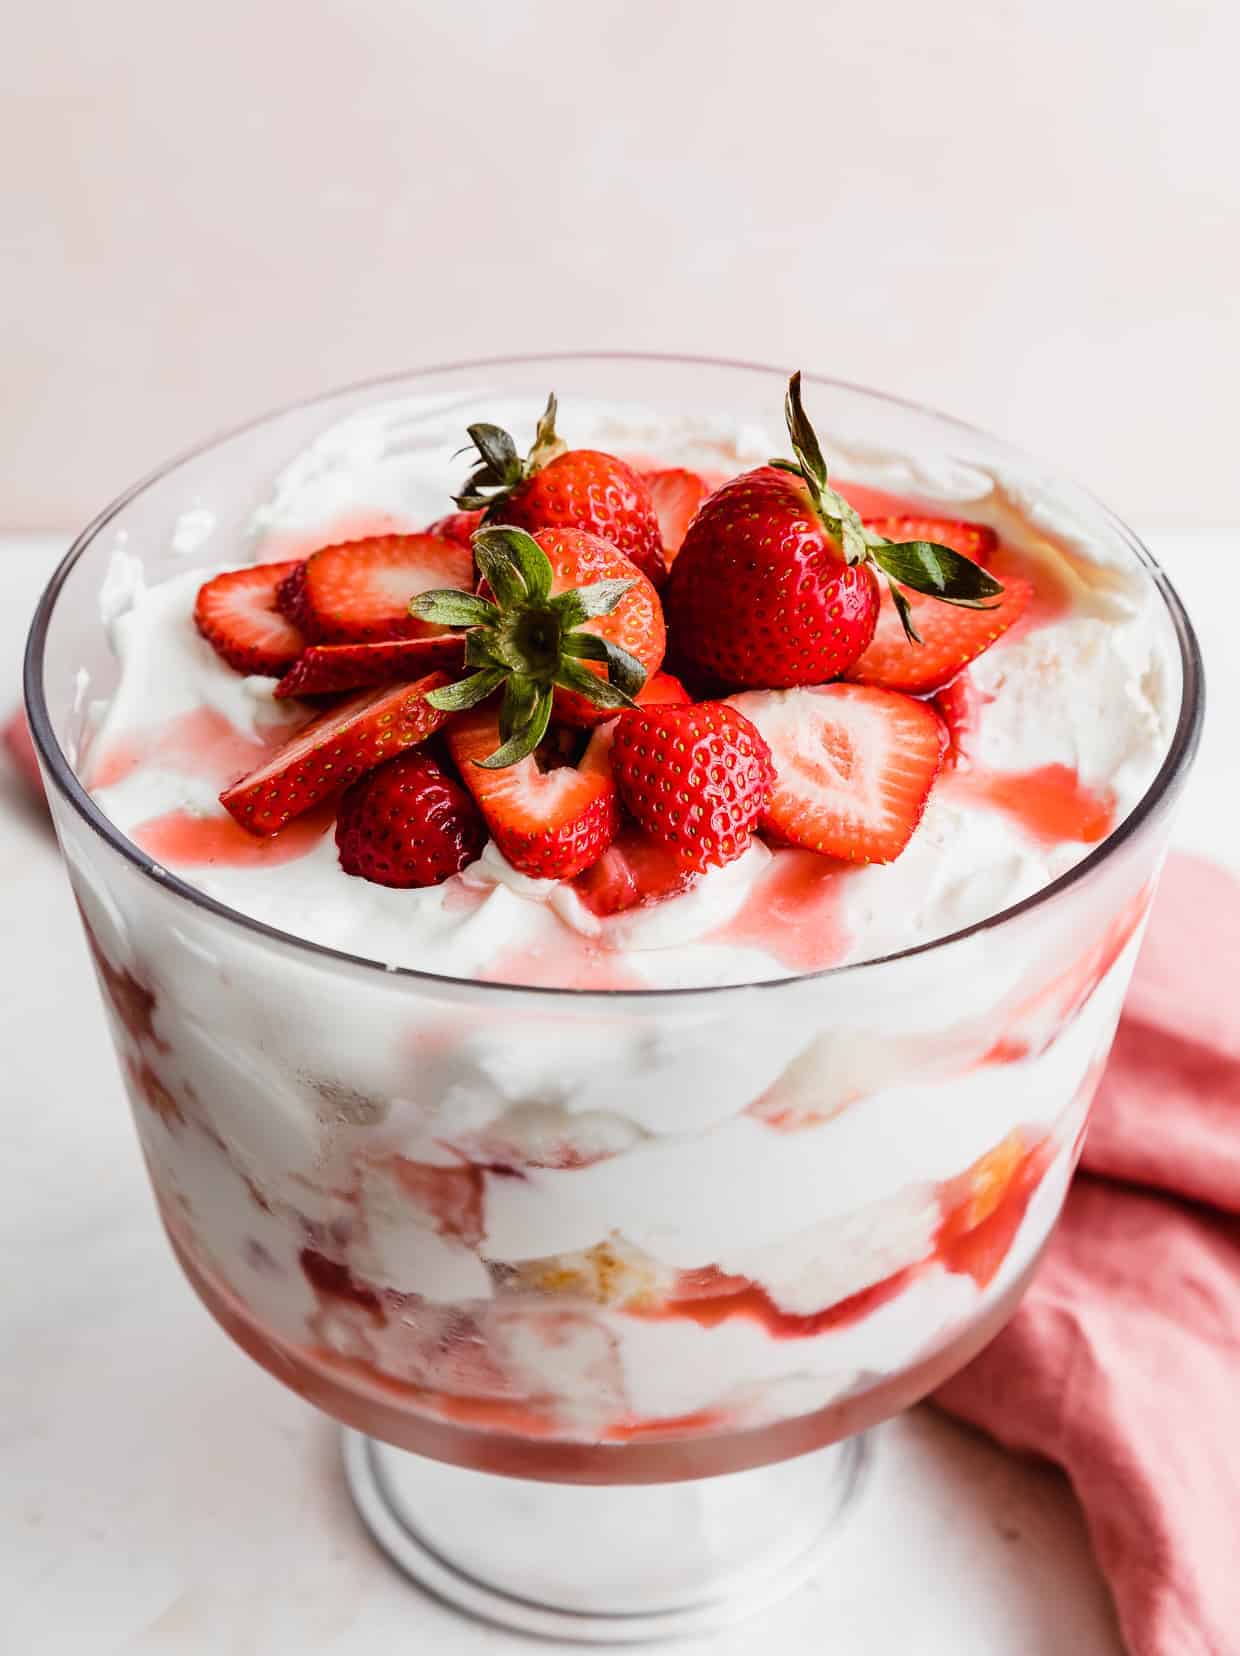 A Strawberry Shortcake Trifle topped with fresh strawberries.